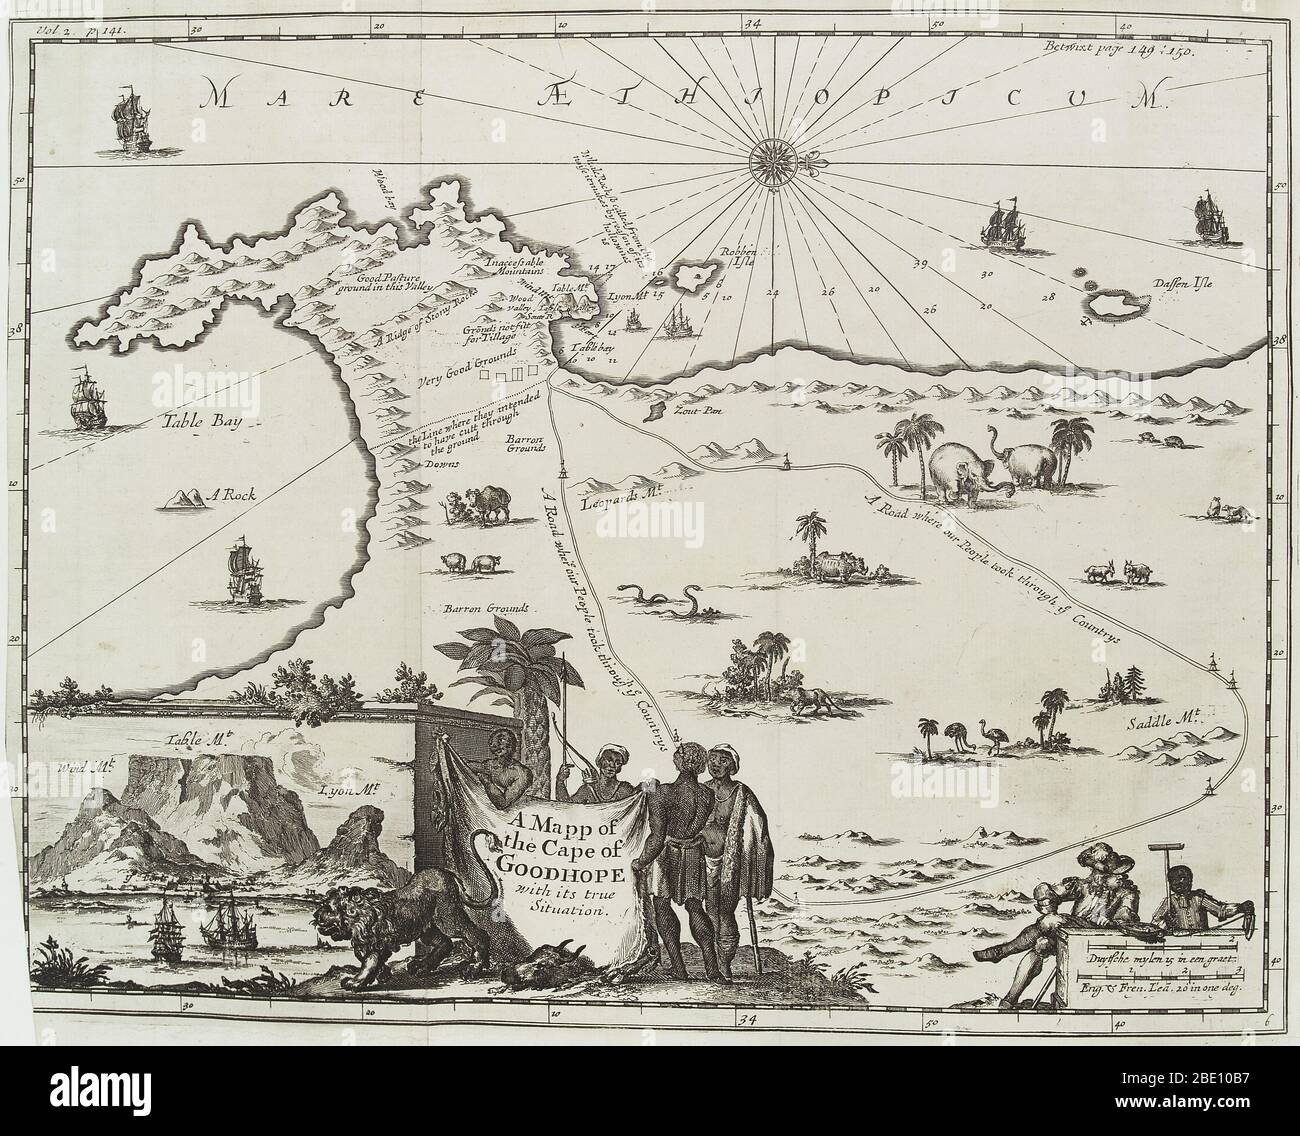 Map of the Cape of Good Hope, South Africa, published 1744 - 1746. Stock Photo